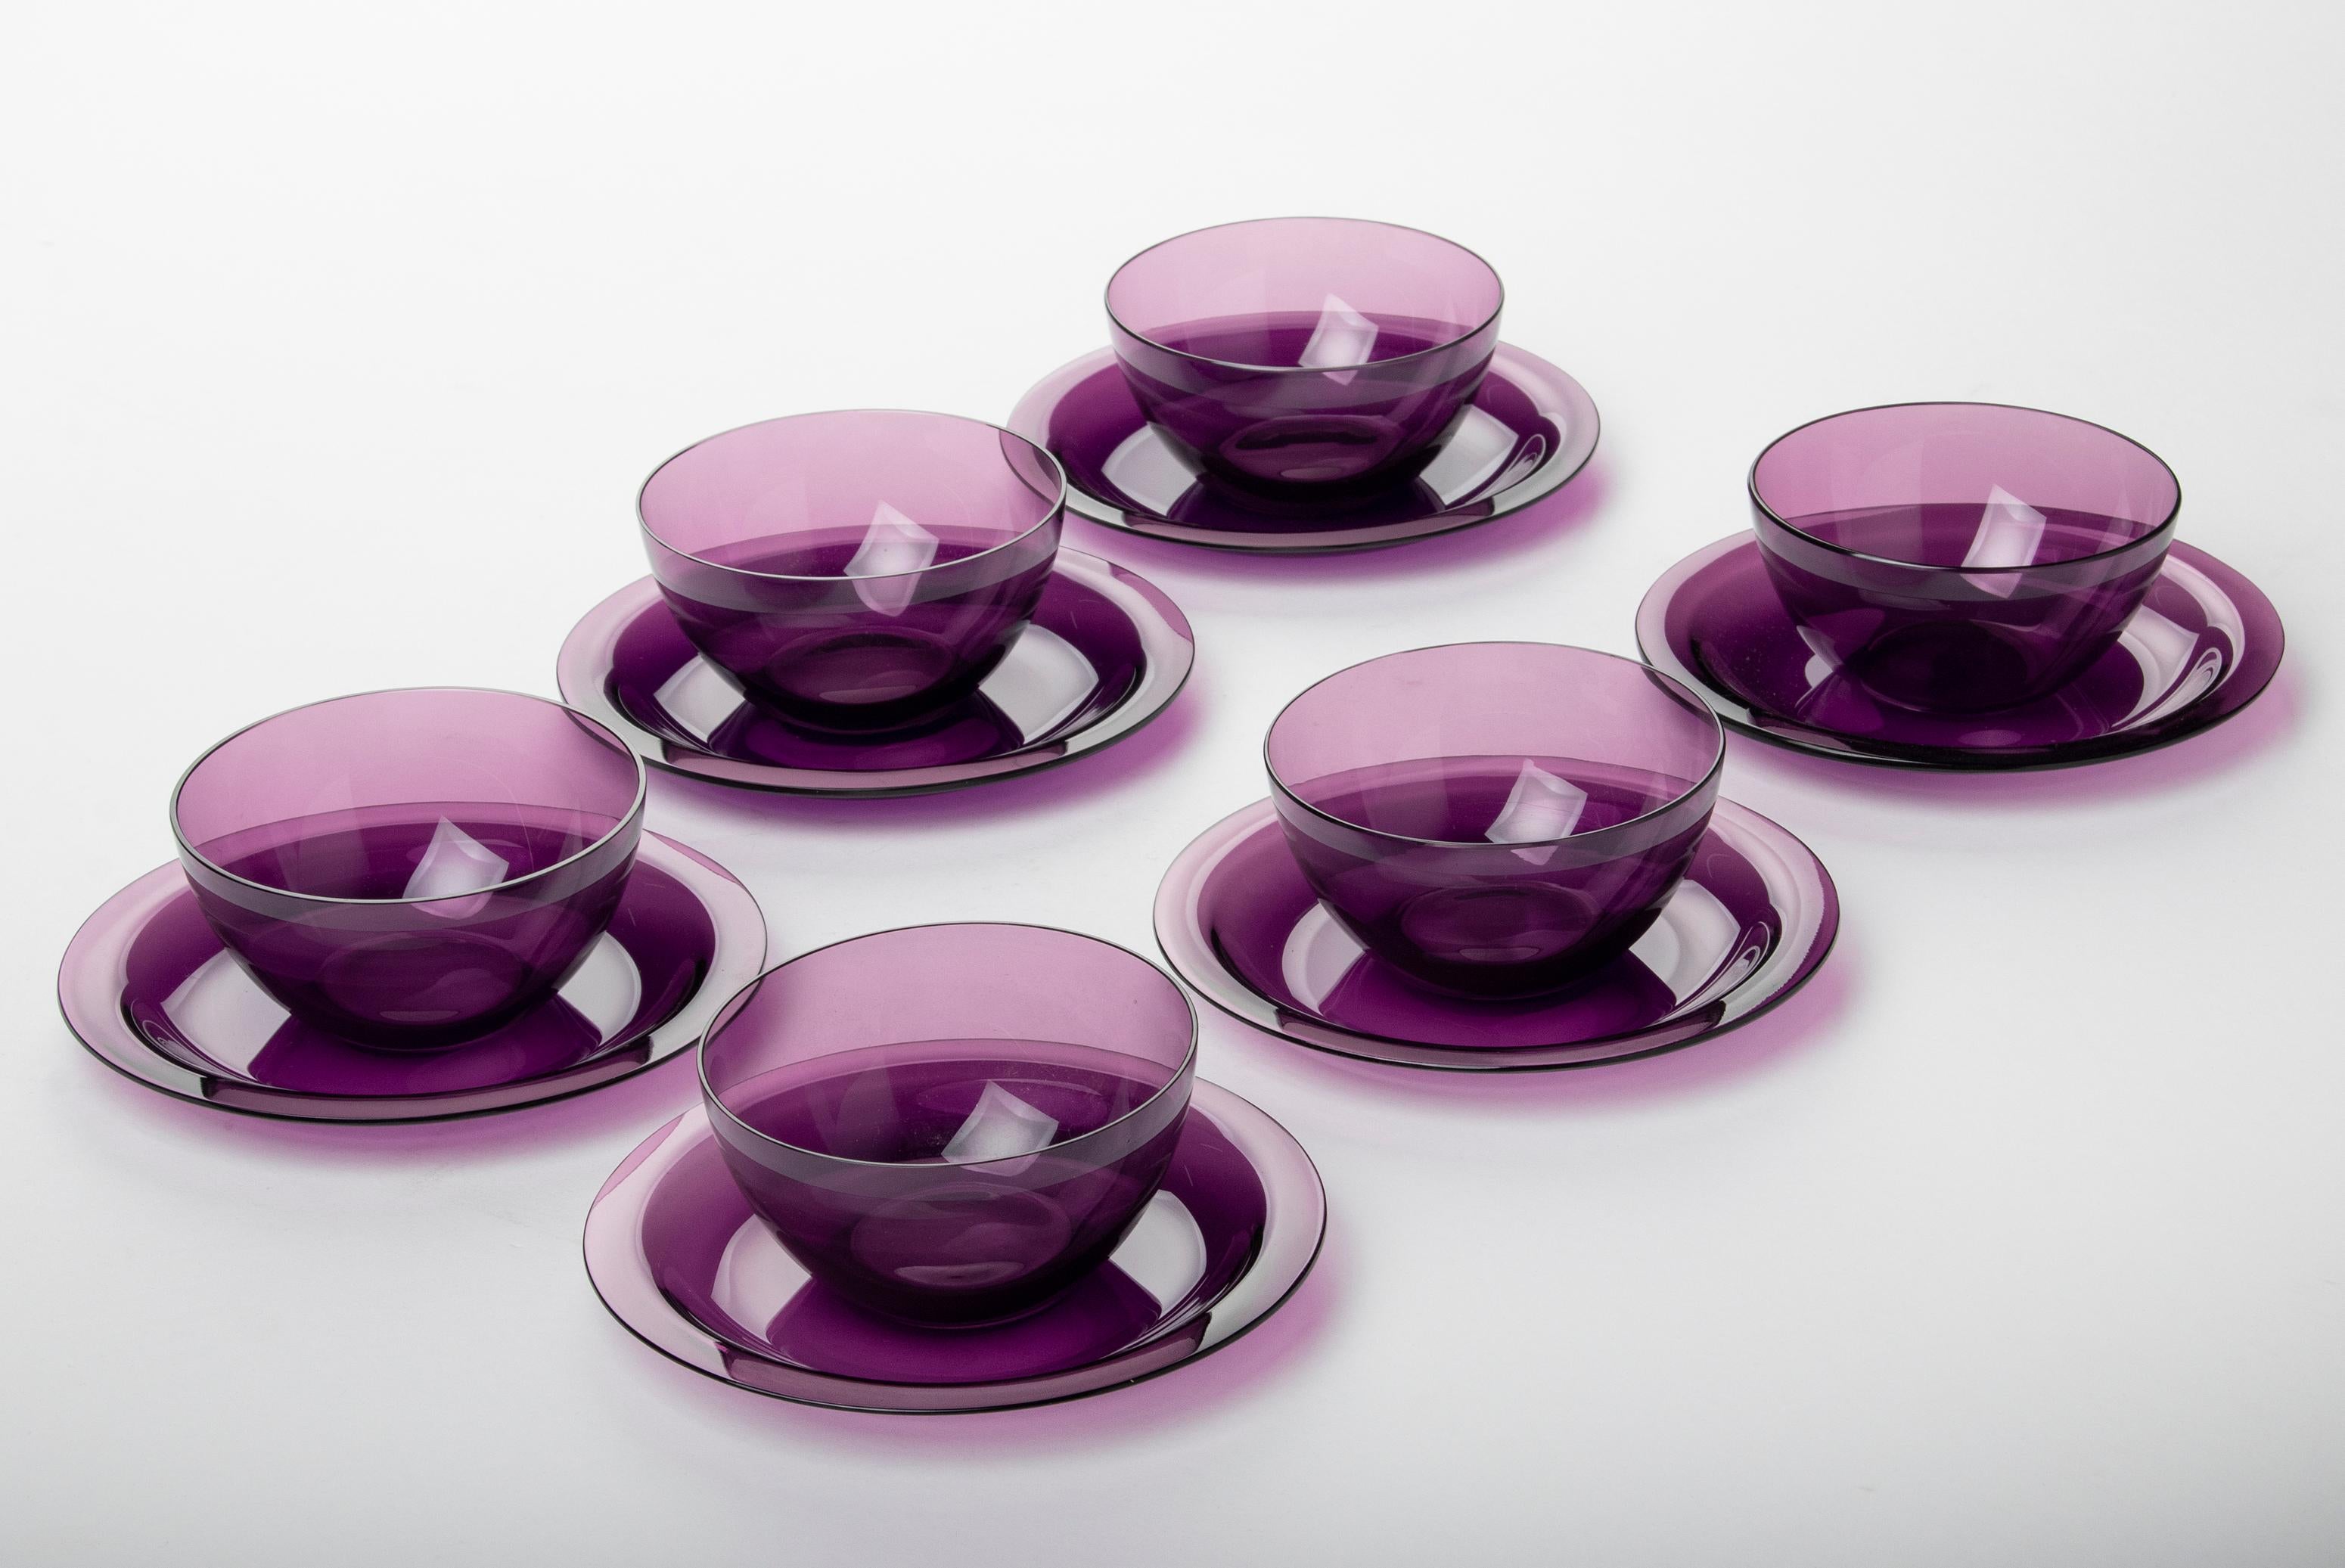 Beautiful set of 6 crystal fruit bowls with saucers from the French brand Lalique. The bowls have a simple, elegant design that emphasizes the top quality of the crystal. The purple color is also special. The dishes were made around 1950. All parts